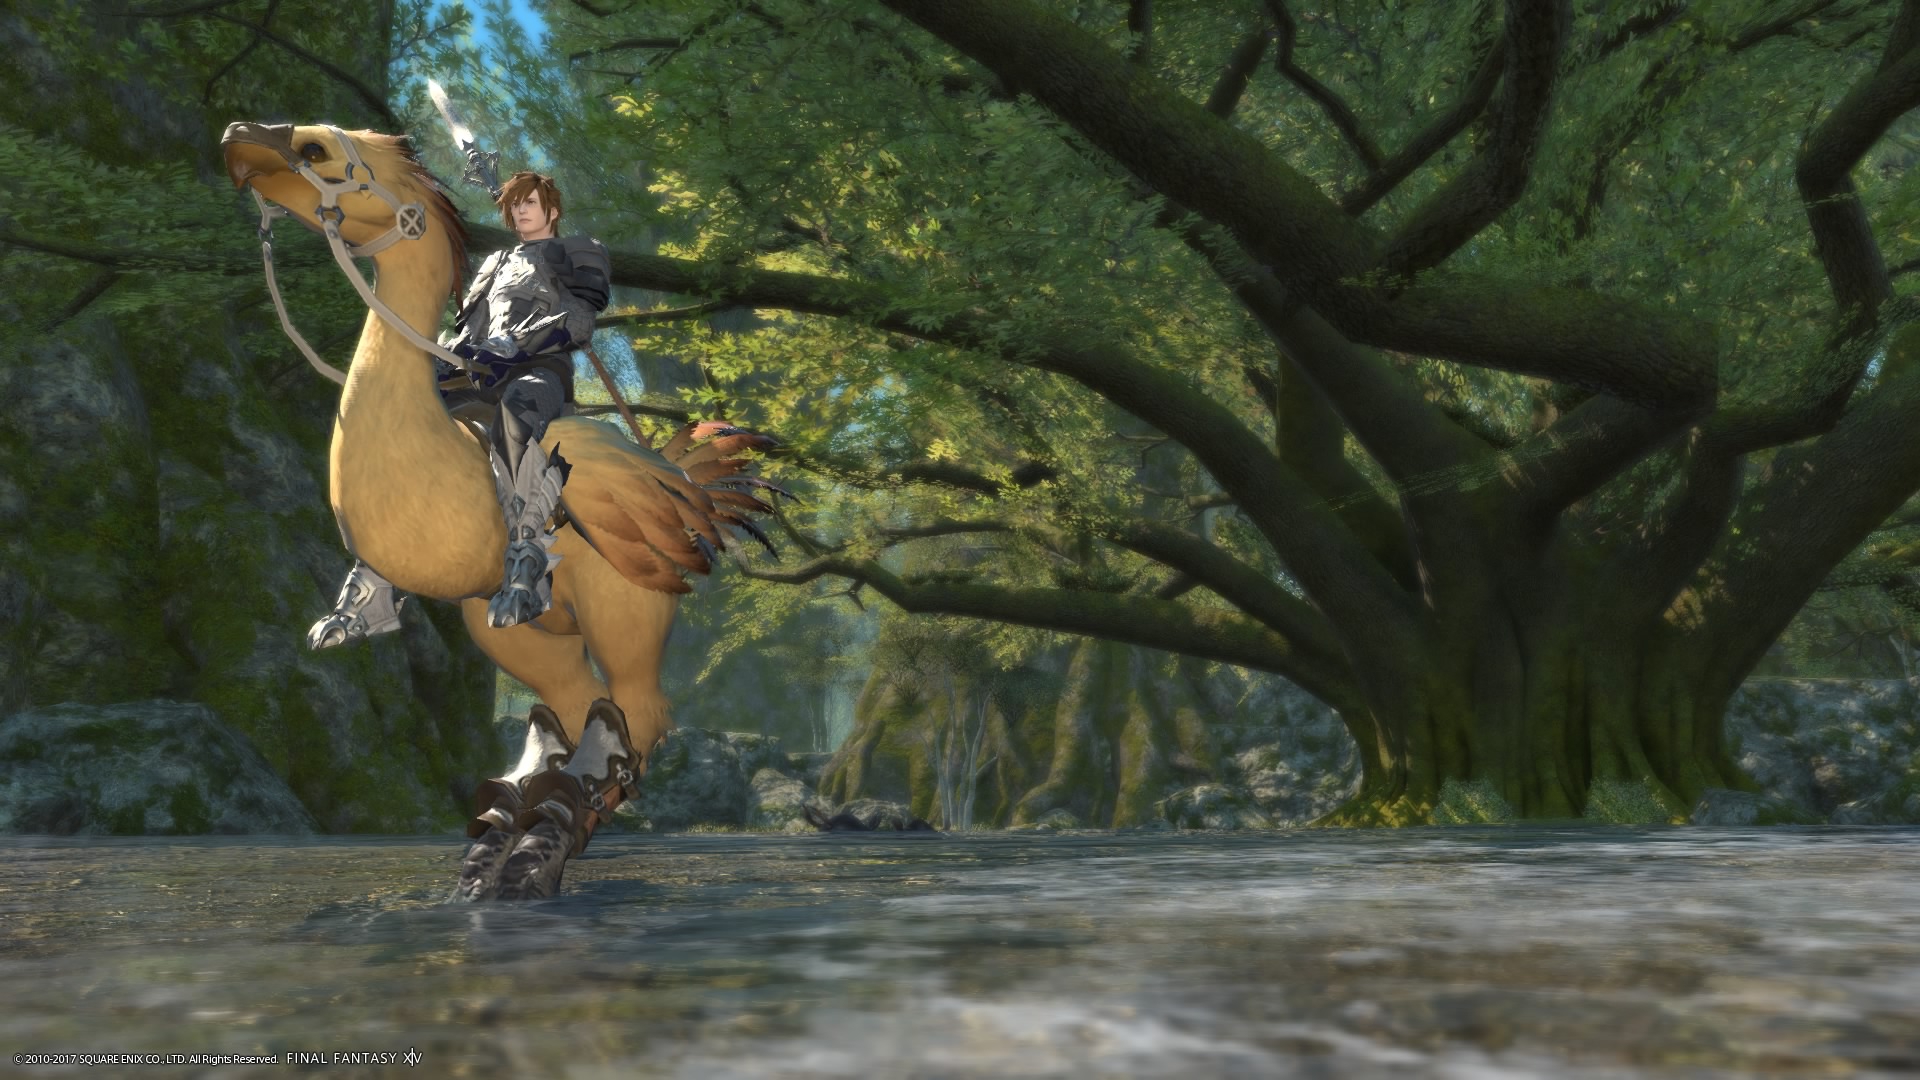 Riding my chocobo, Kato, in the central shroud.